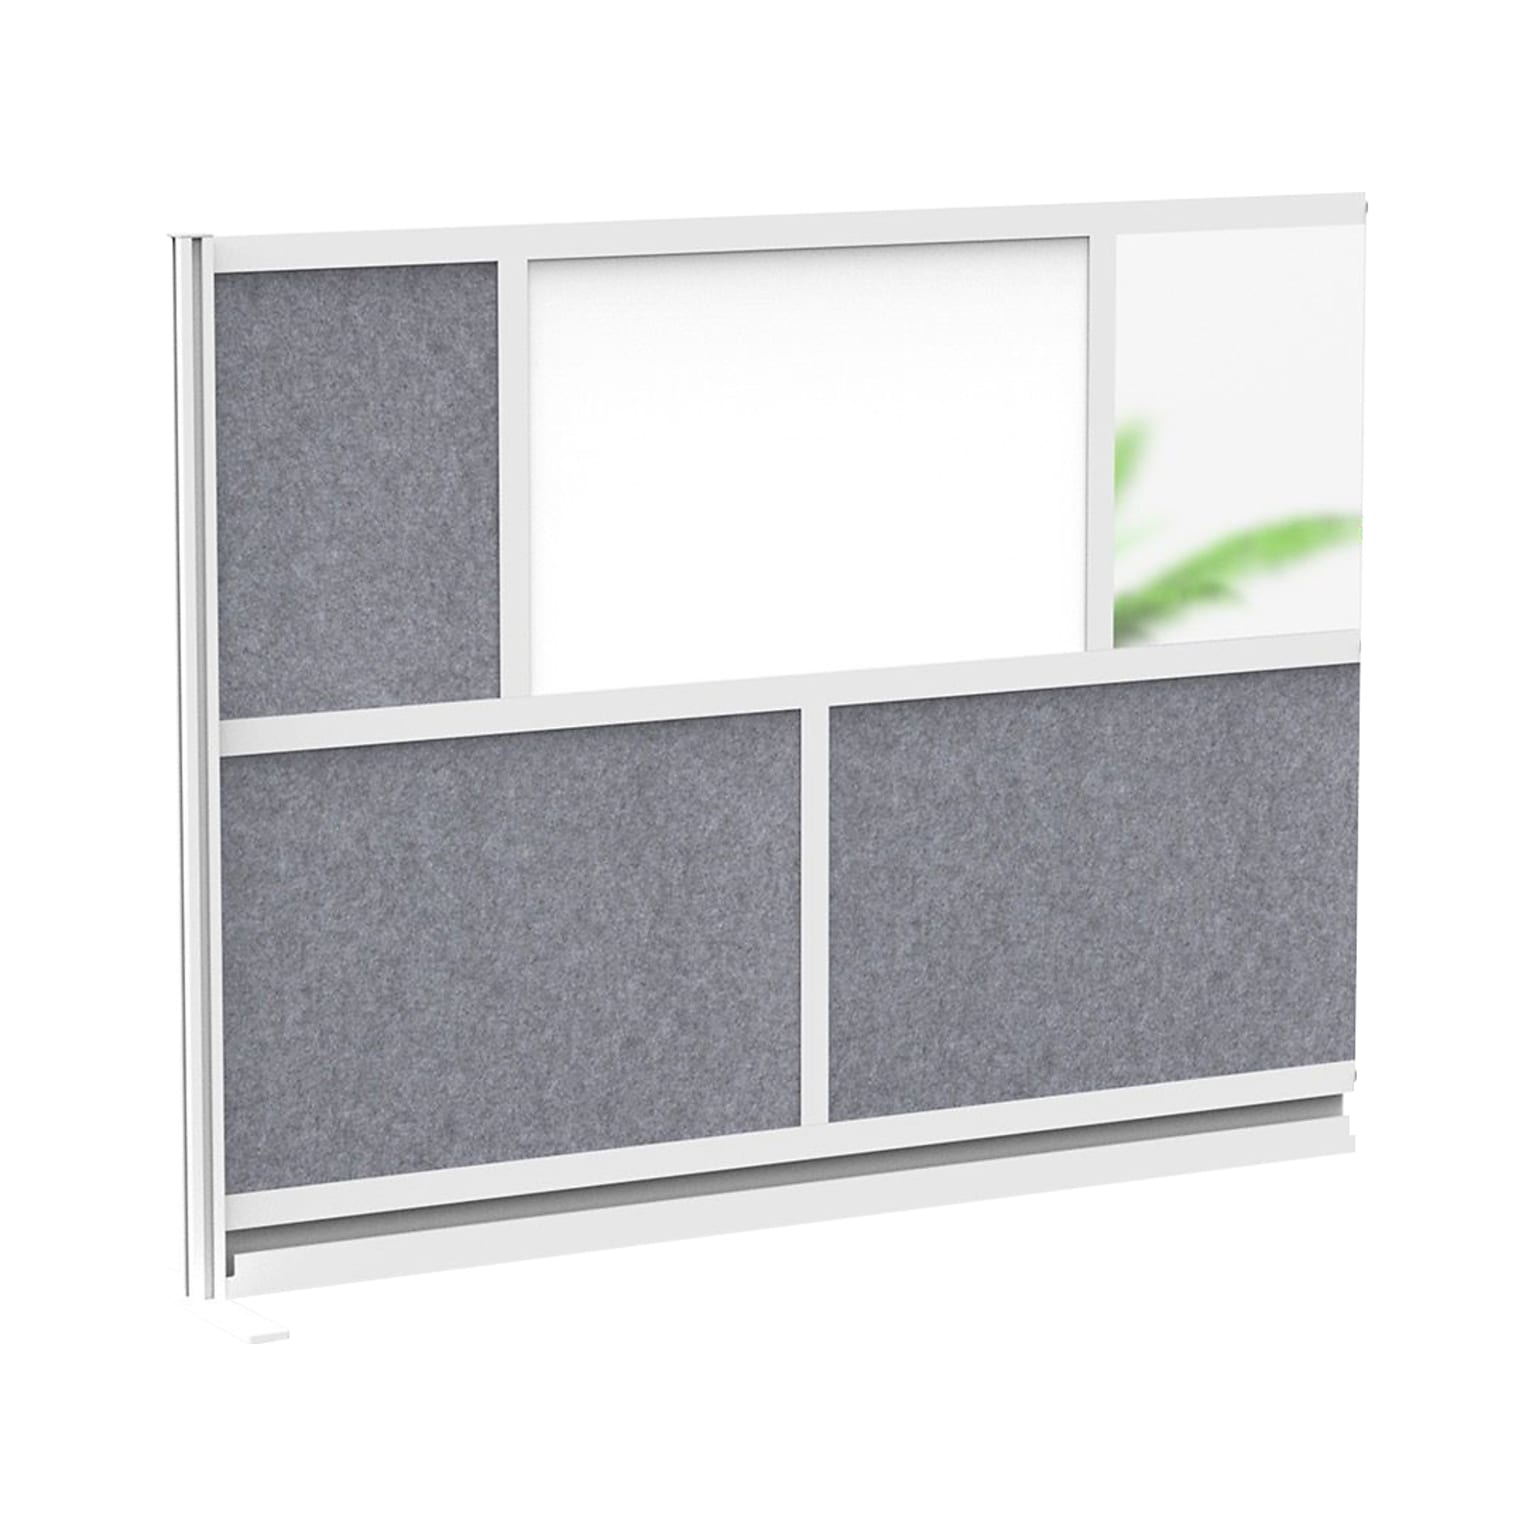 Luxor Workflow Series 5-Panel Modular Room Divider System Add-On Wall with Whiteboard, 48H x 70W, Gray/Silver